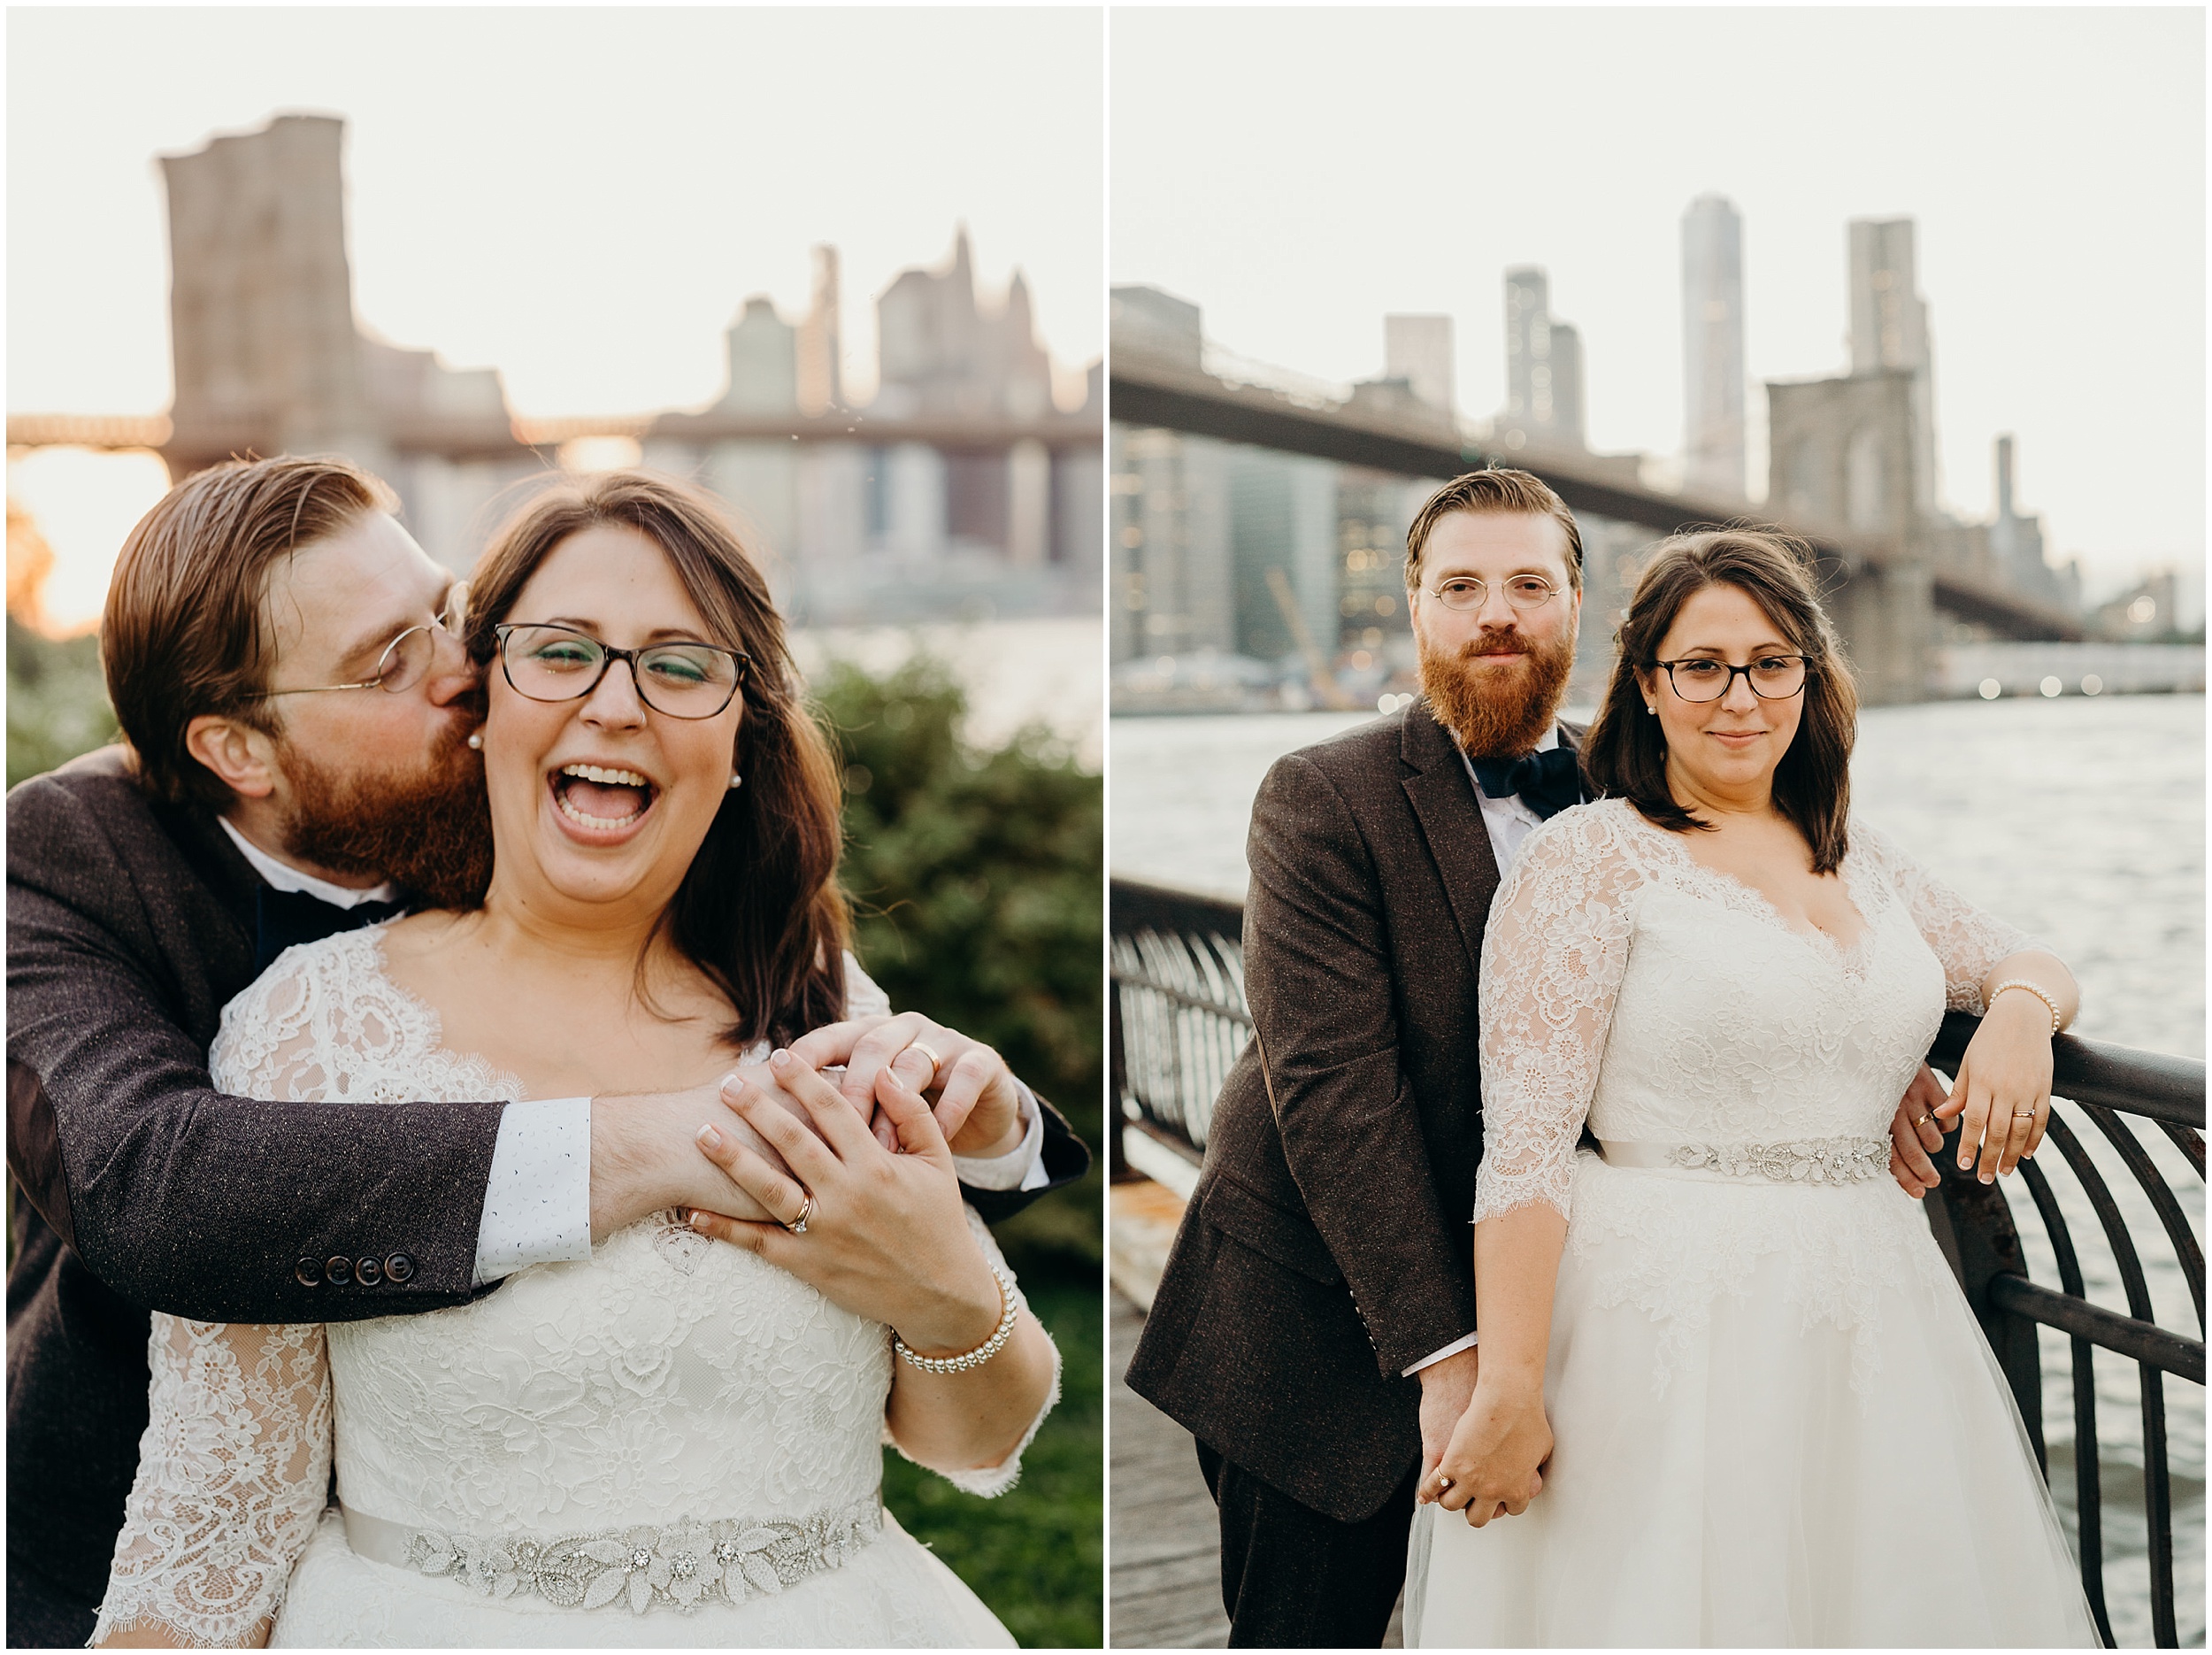 a portrait of a bride and groom at DUMBO in brooklyn, ny